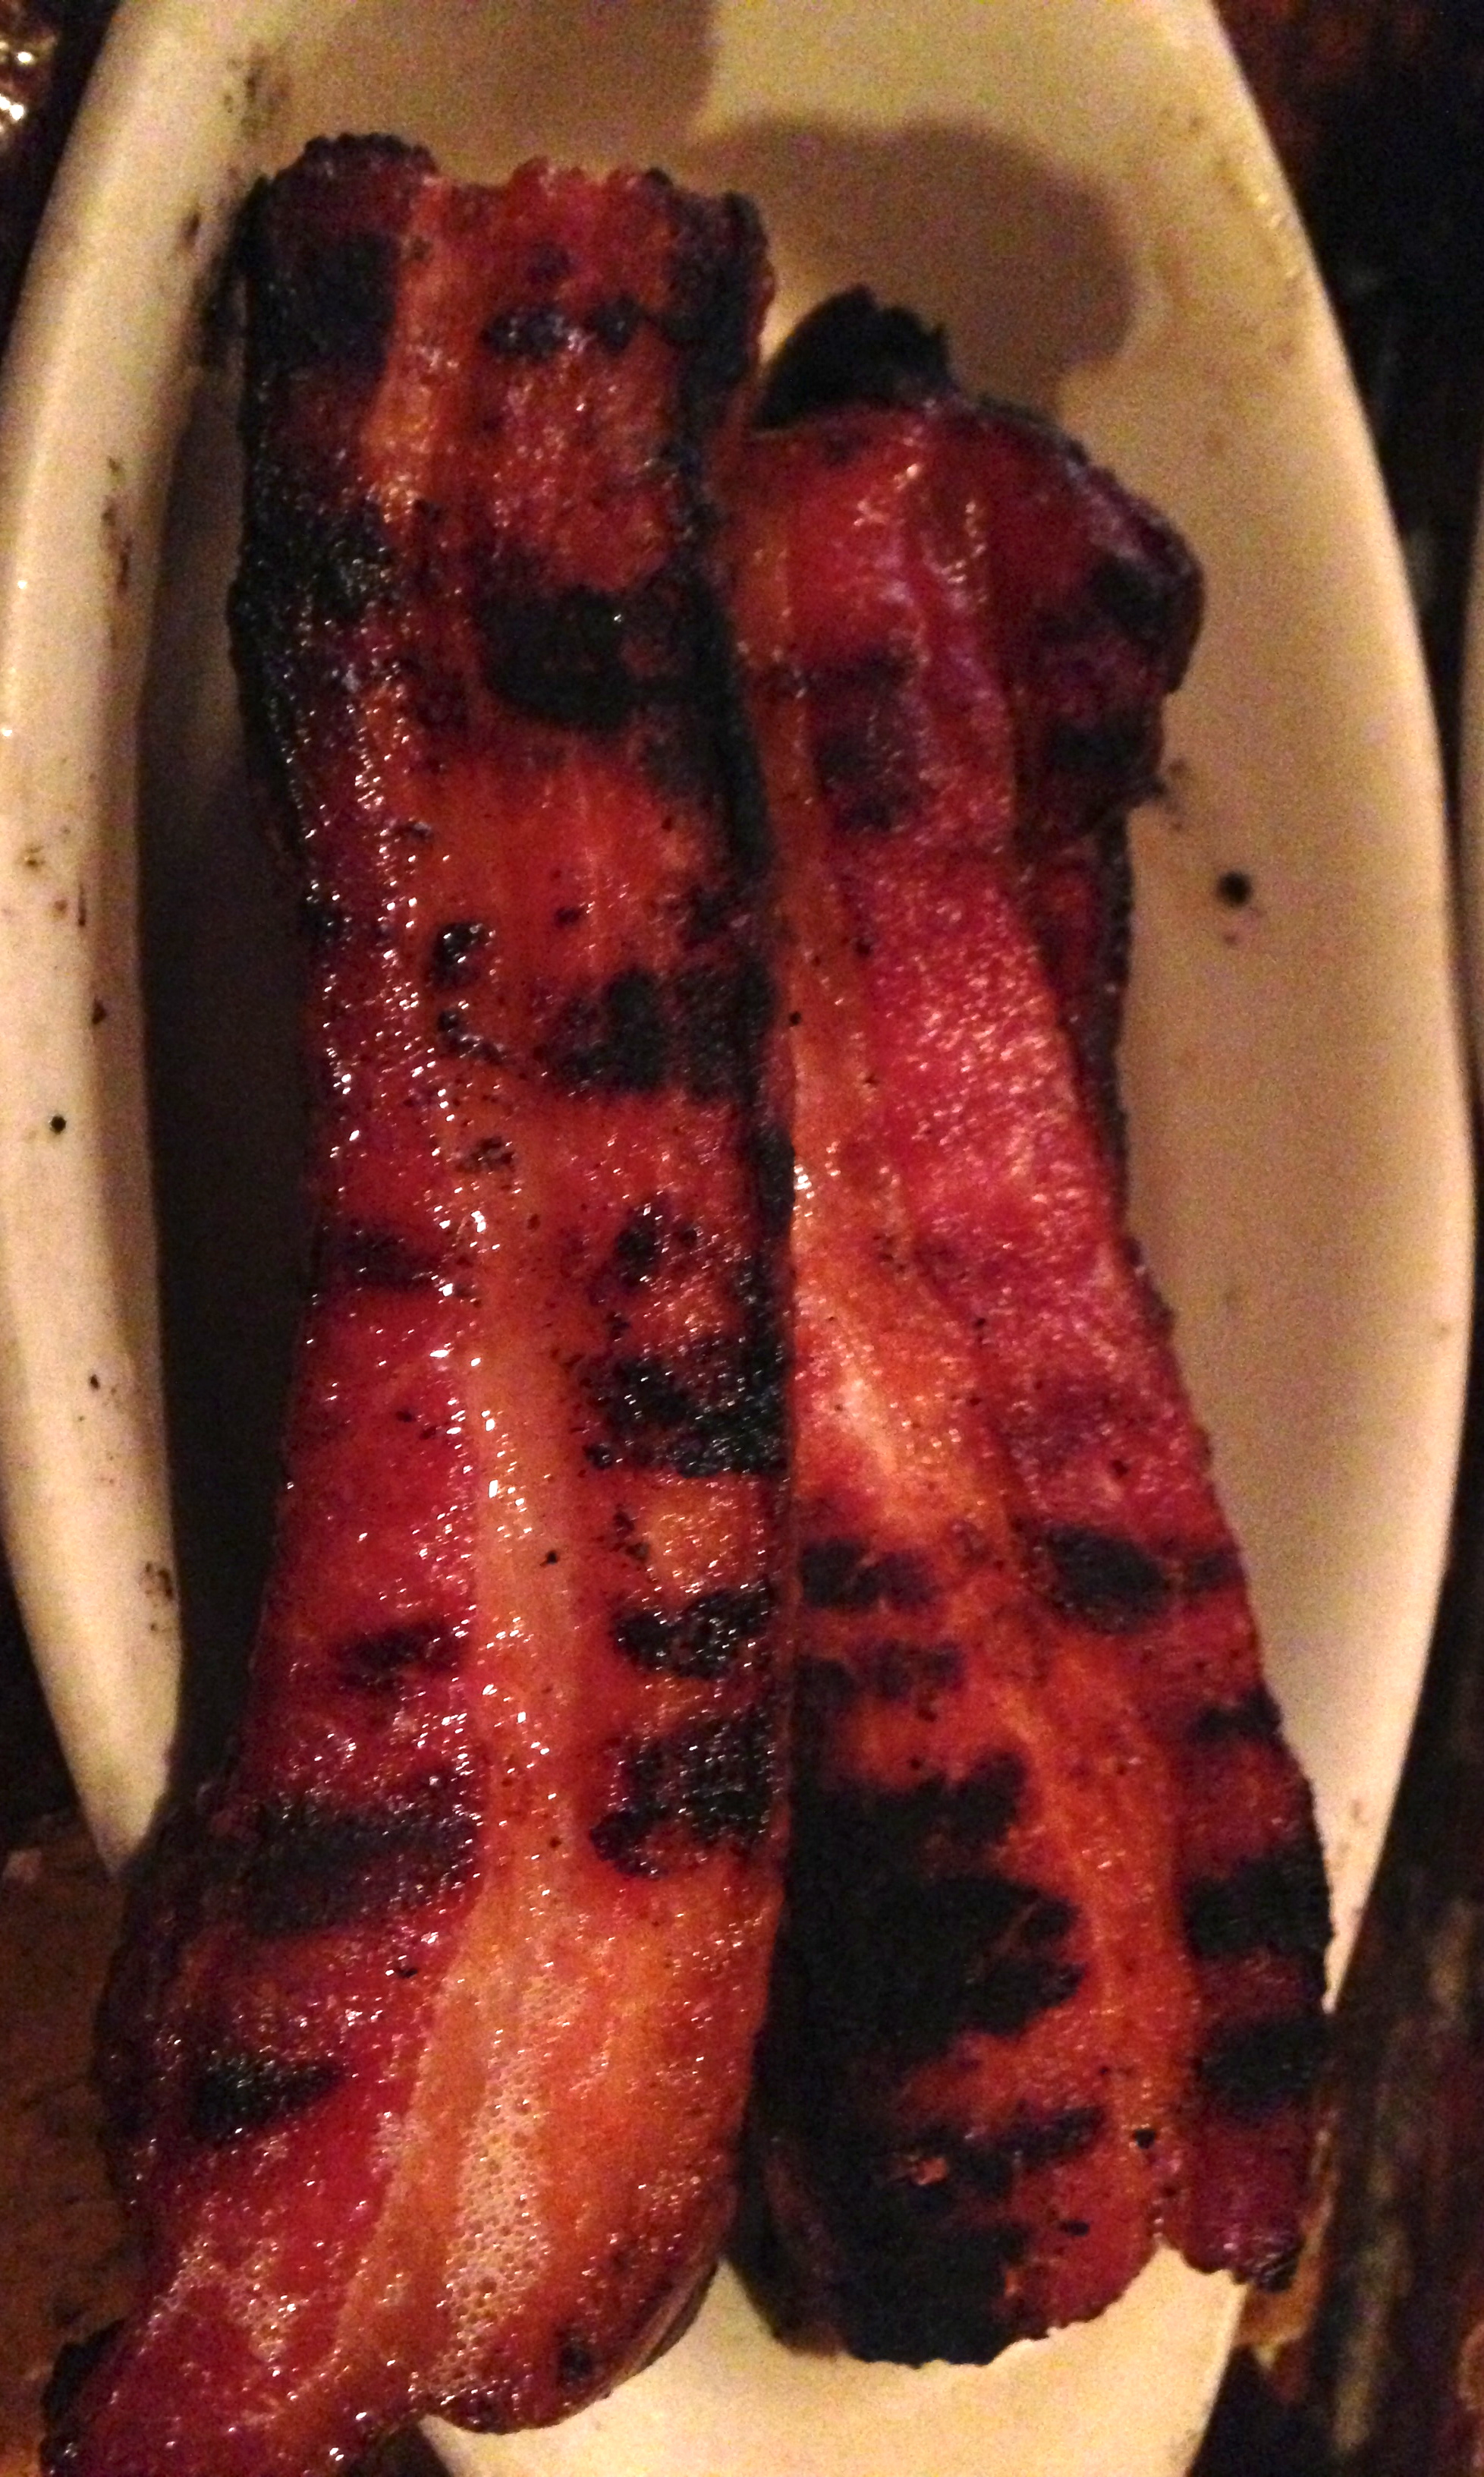 Thick cut bacon